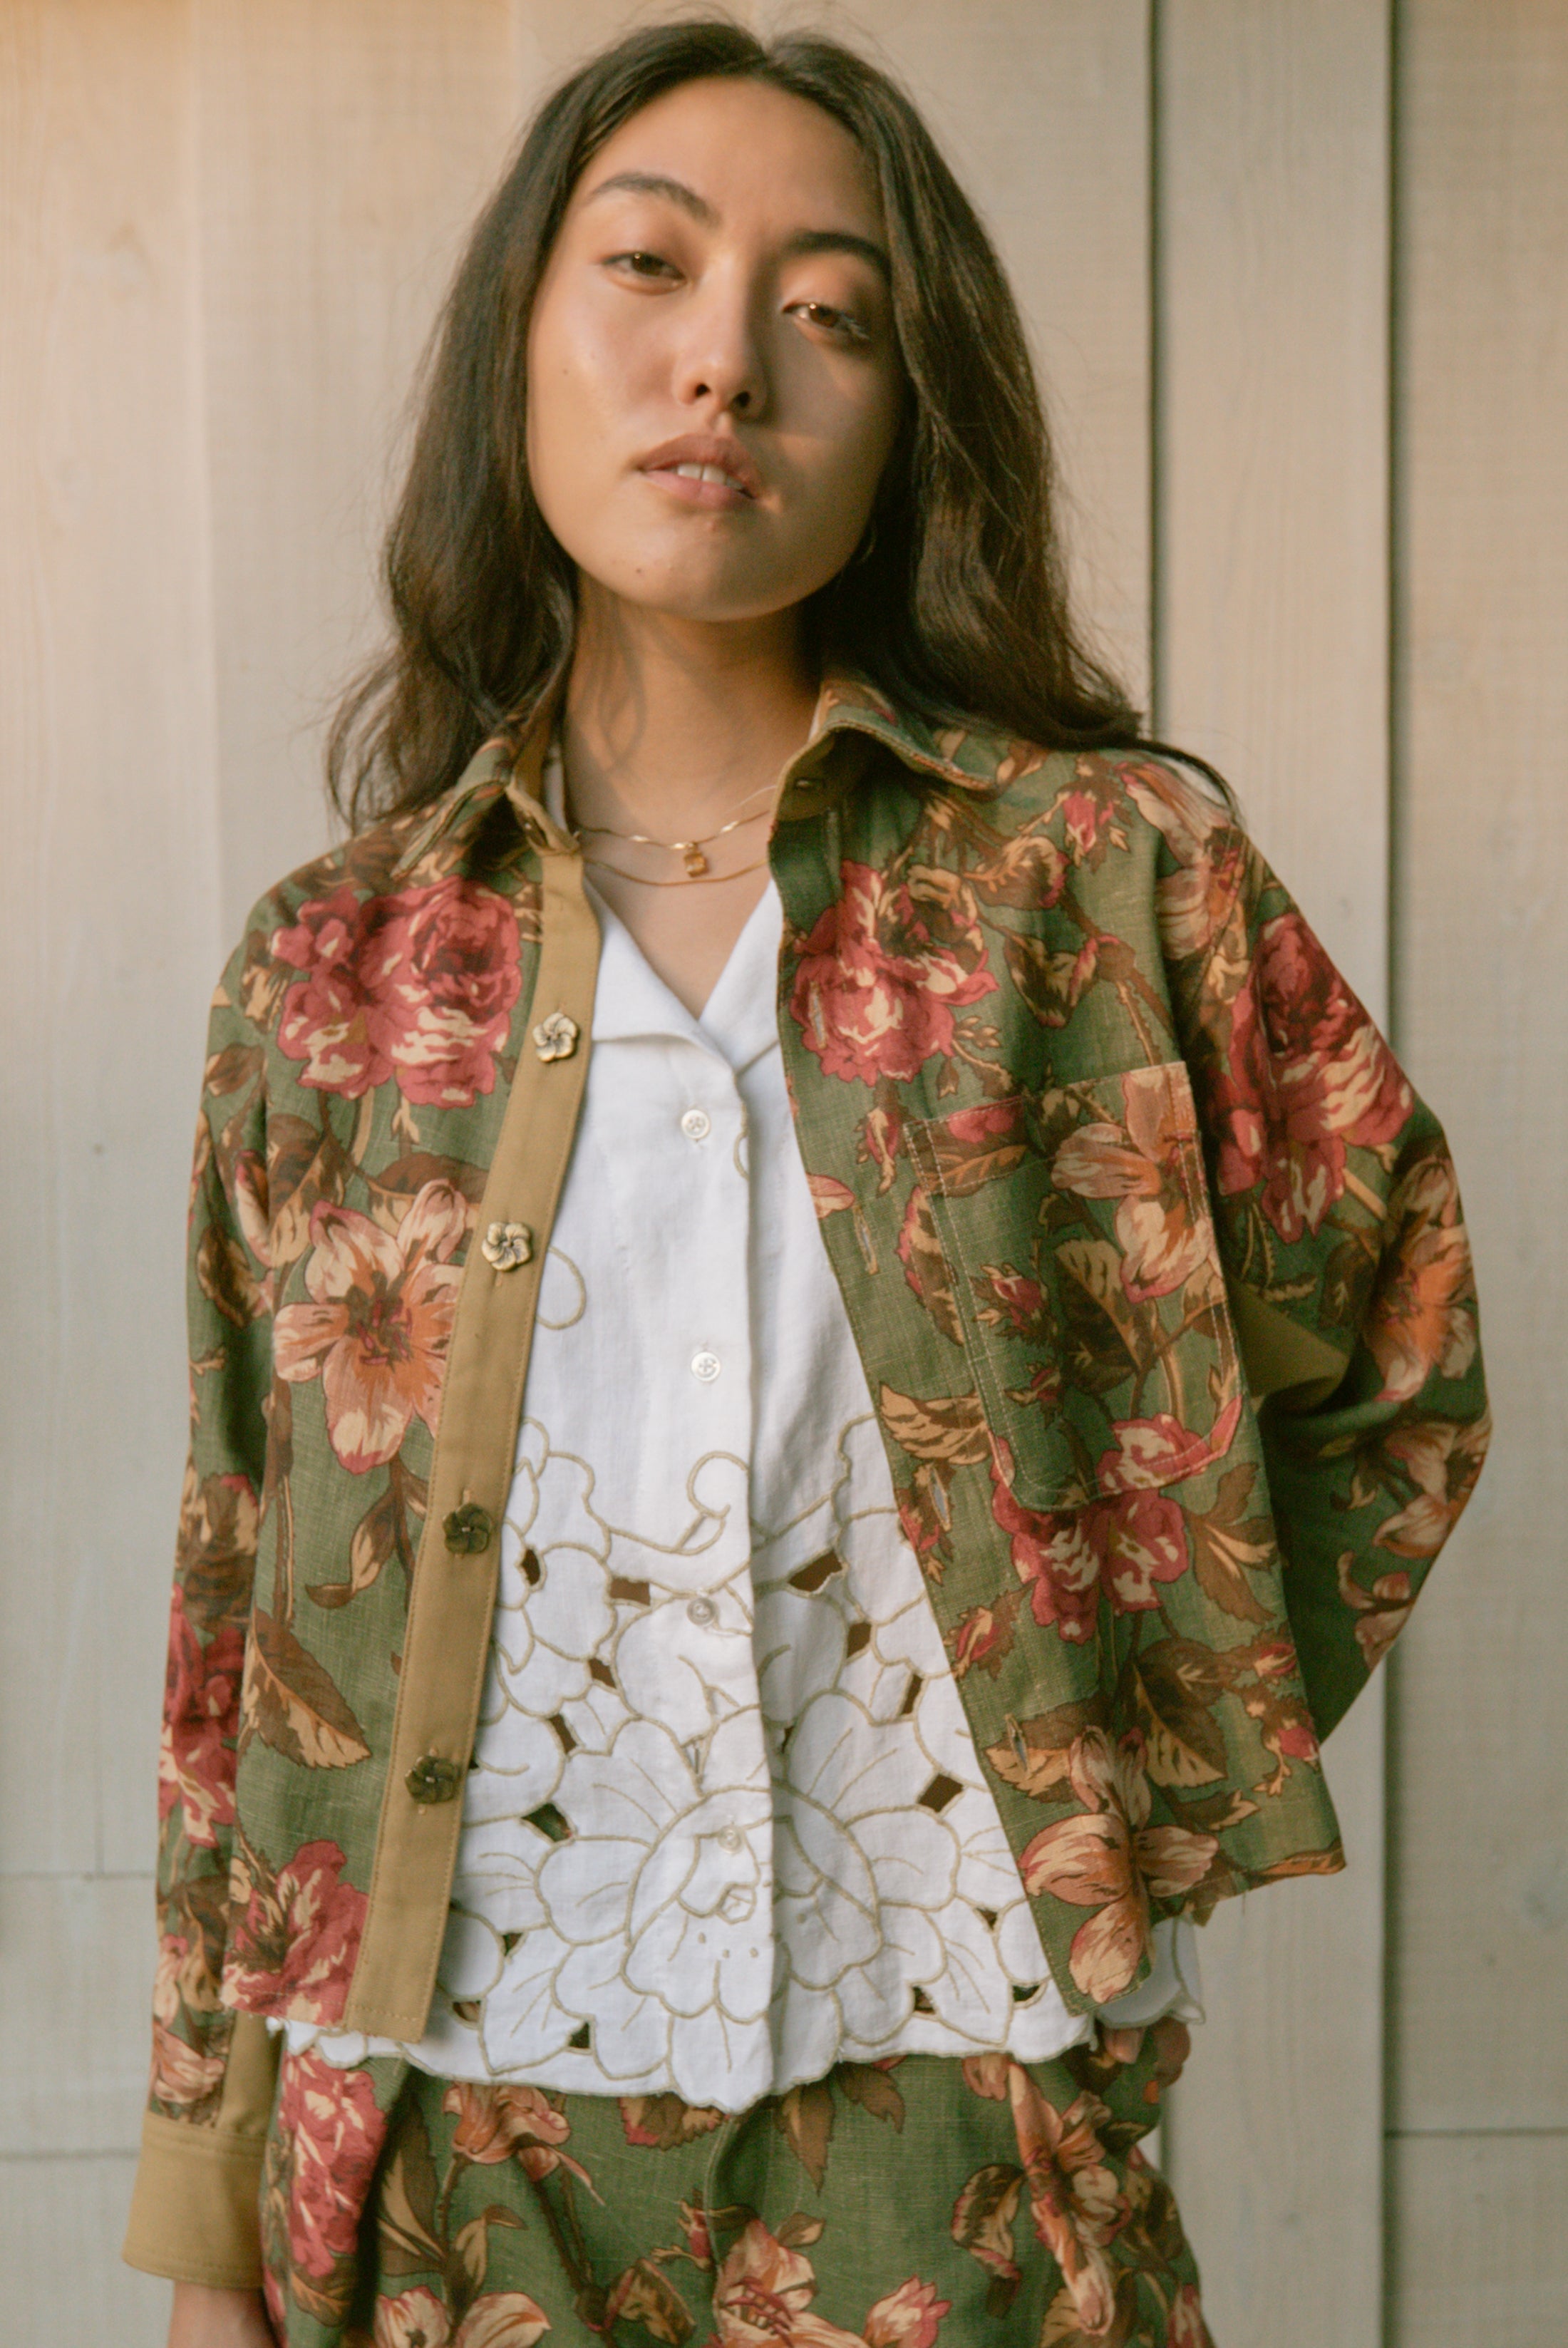 Jess Meany Green Floral Shirt Jacket Front